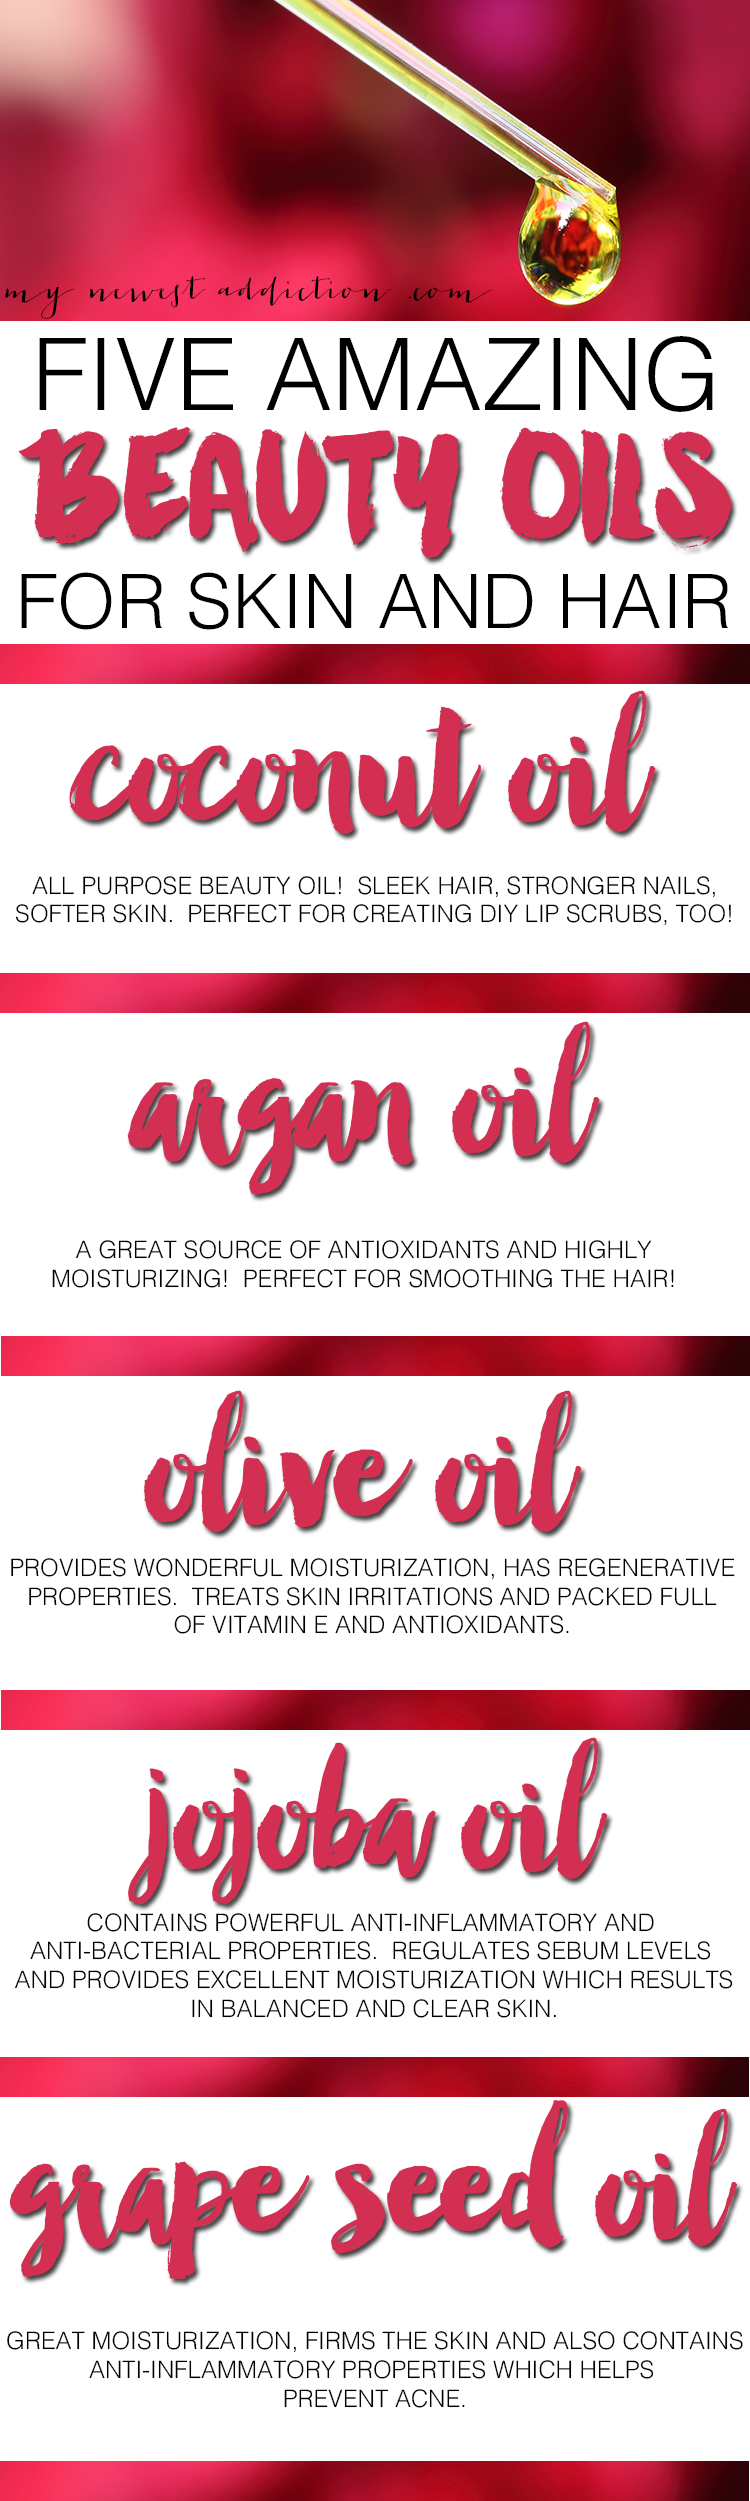 5 amazing beauty oils for skin and hair by My News Addiction 